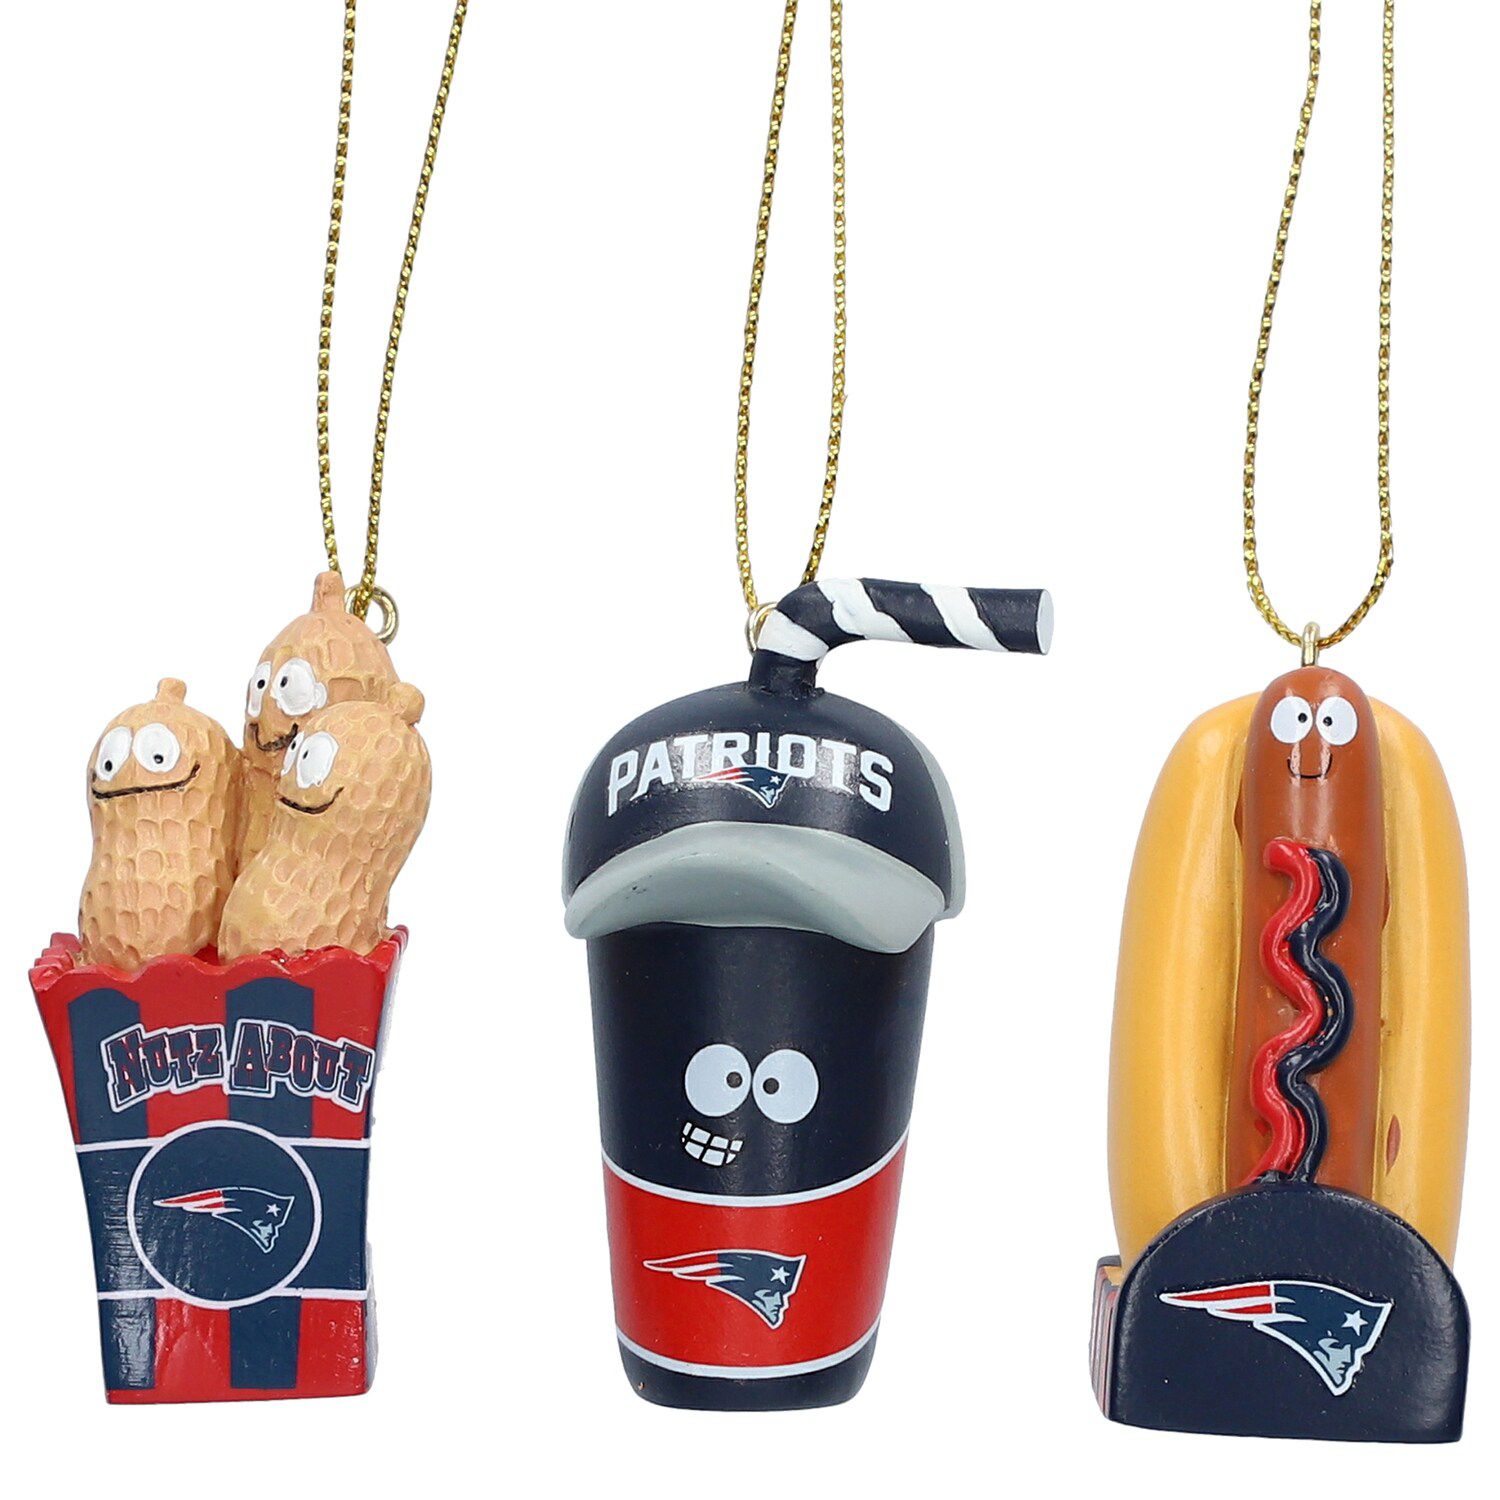 Image for Unbranded New England Patriots Snack Pack Ornament Set at Kohl's.